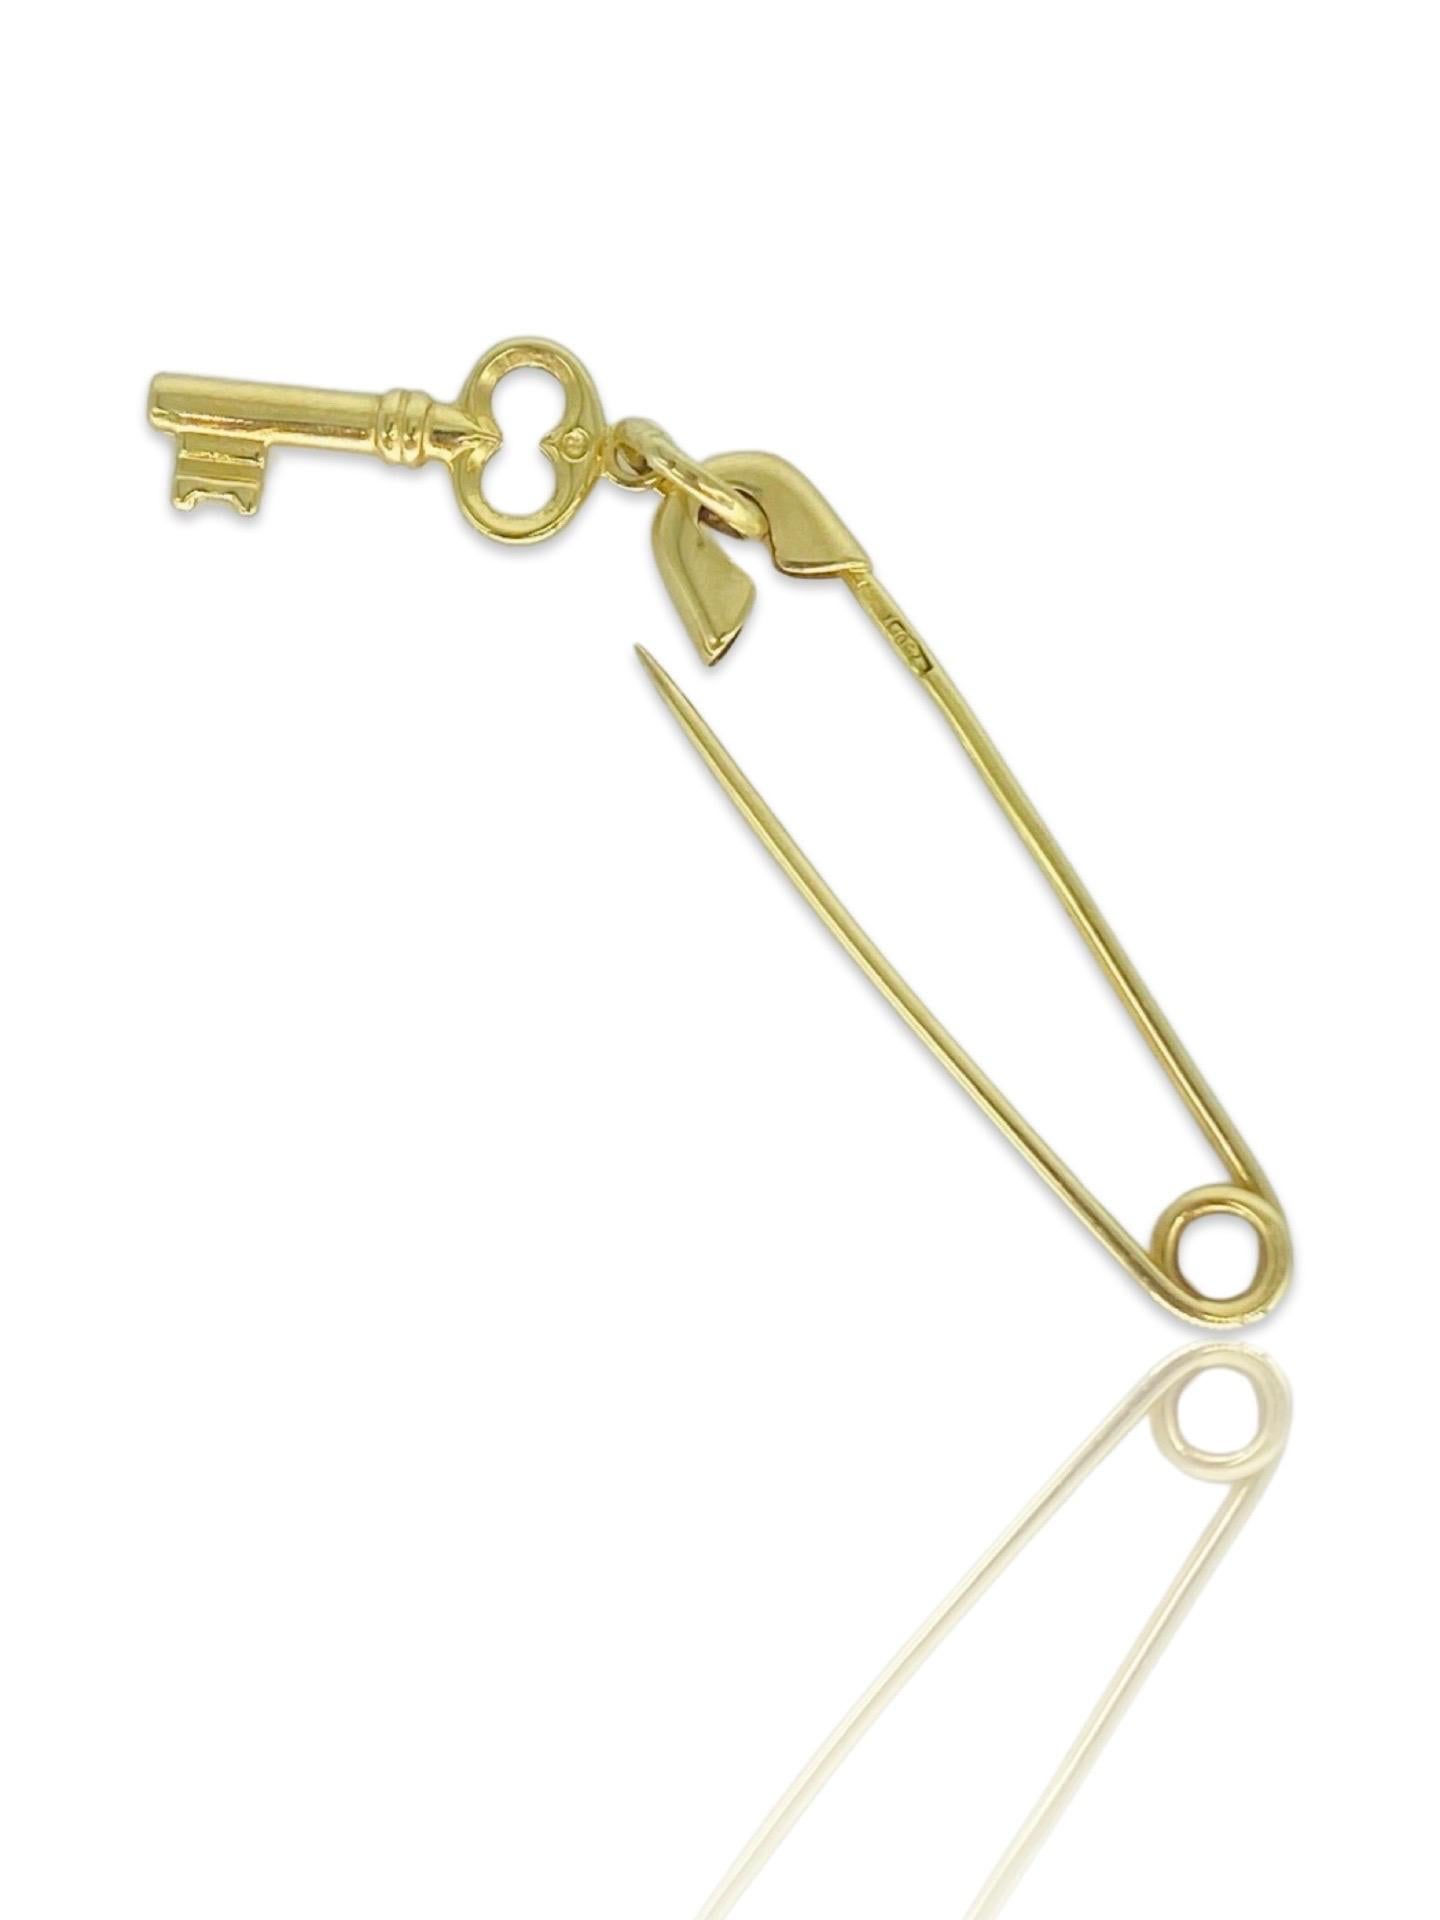 Vintage Safety Pin With Key 18k Gold Italy. The safety pin measures 1.5 Inch in length. The total weight is 2.6g made in Italy and stamped 750 (gold purity) 504 VI (designer Venice)